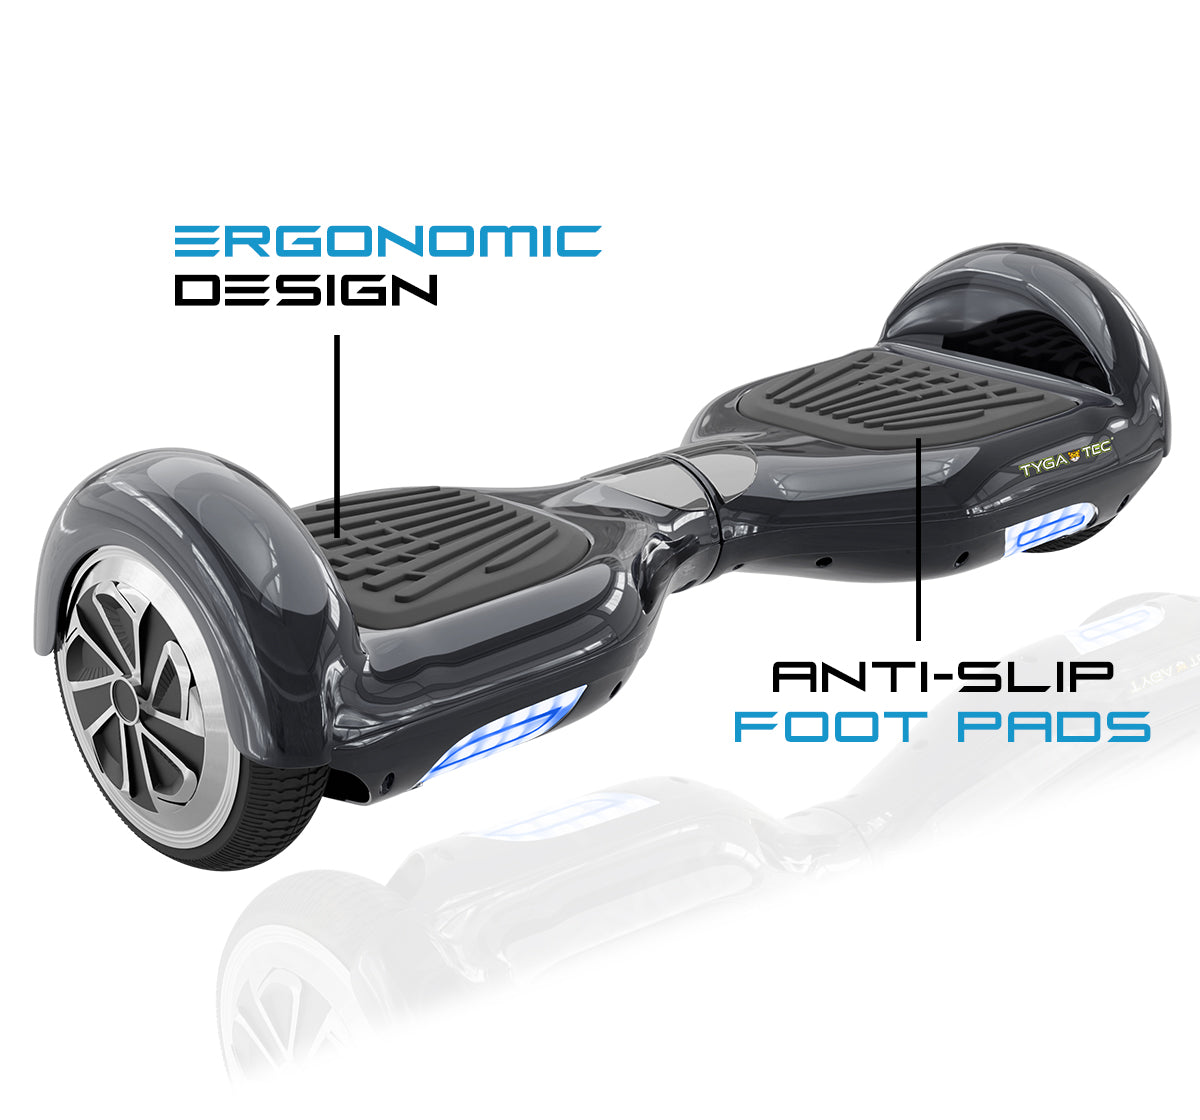 Tygatec T1 ECO - Self Balancing Electric Hoverboard (Black Color)